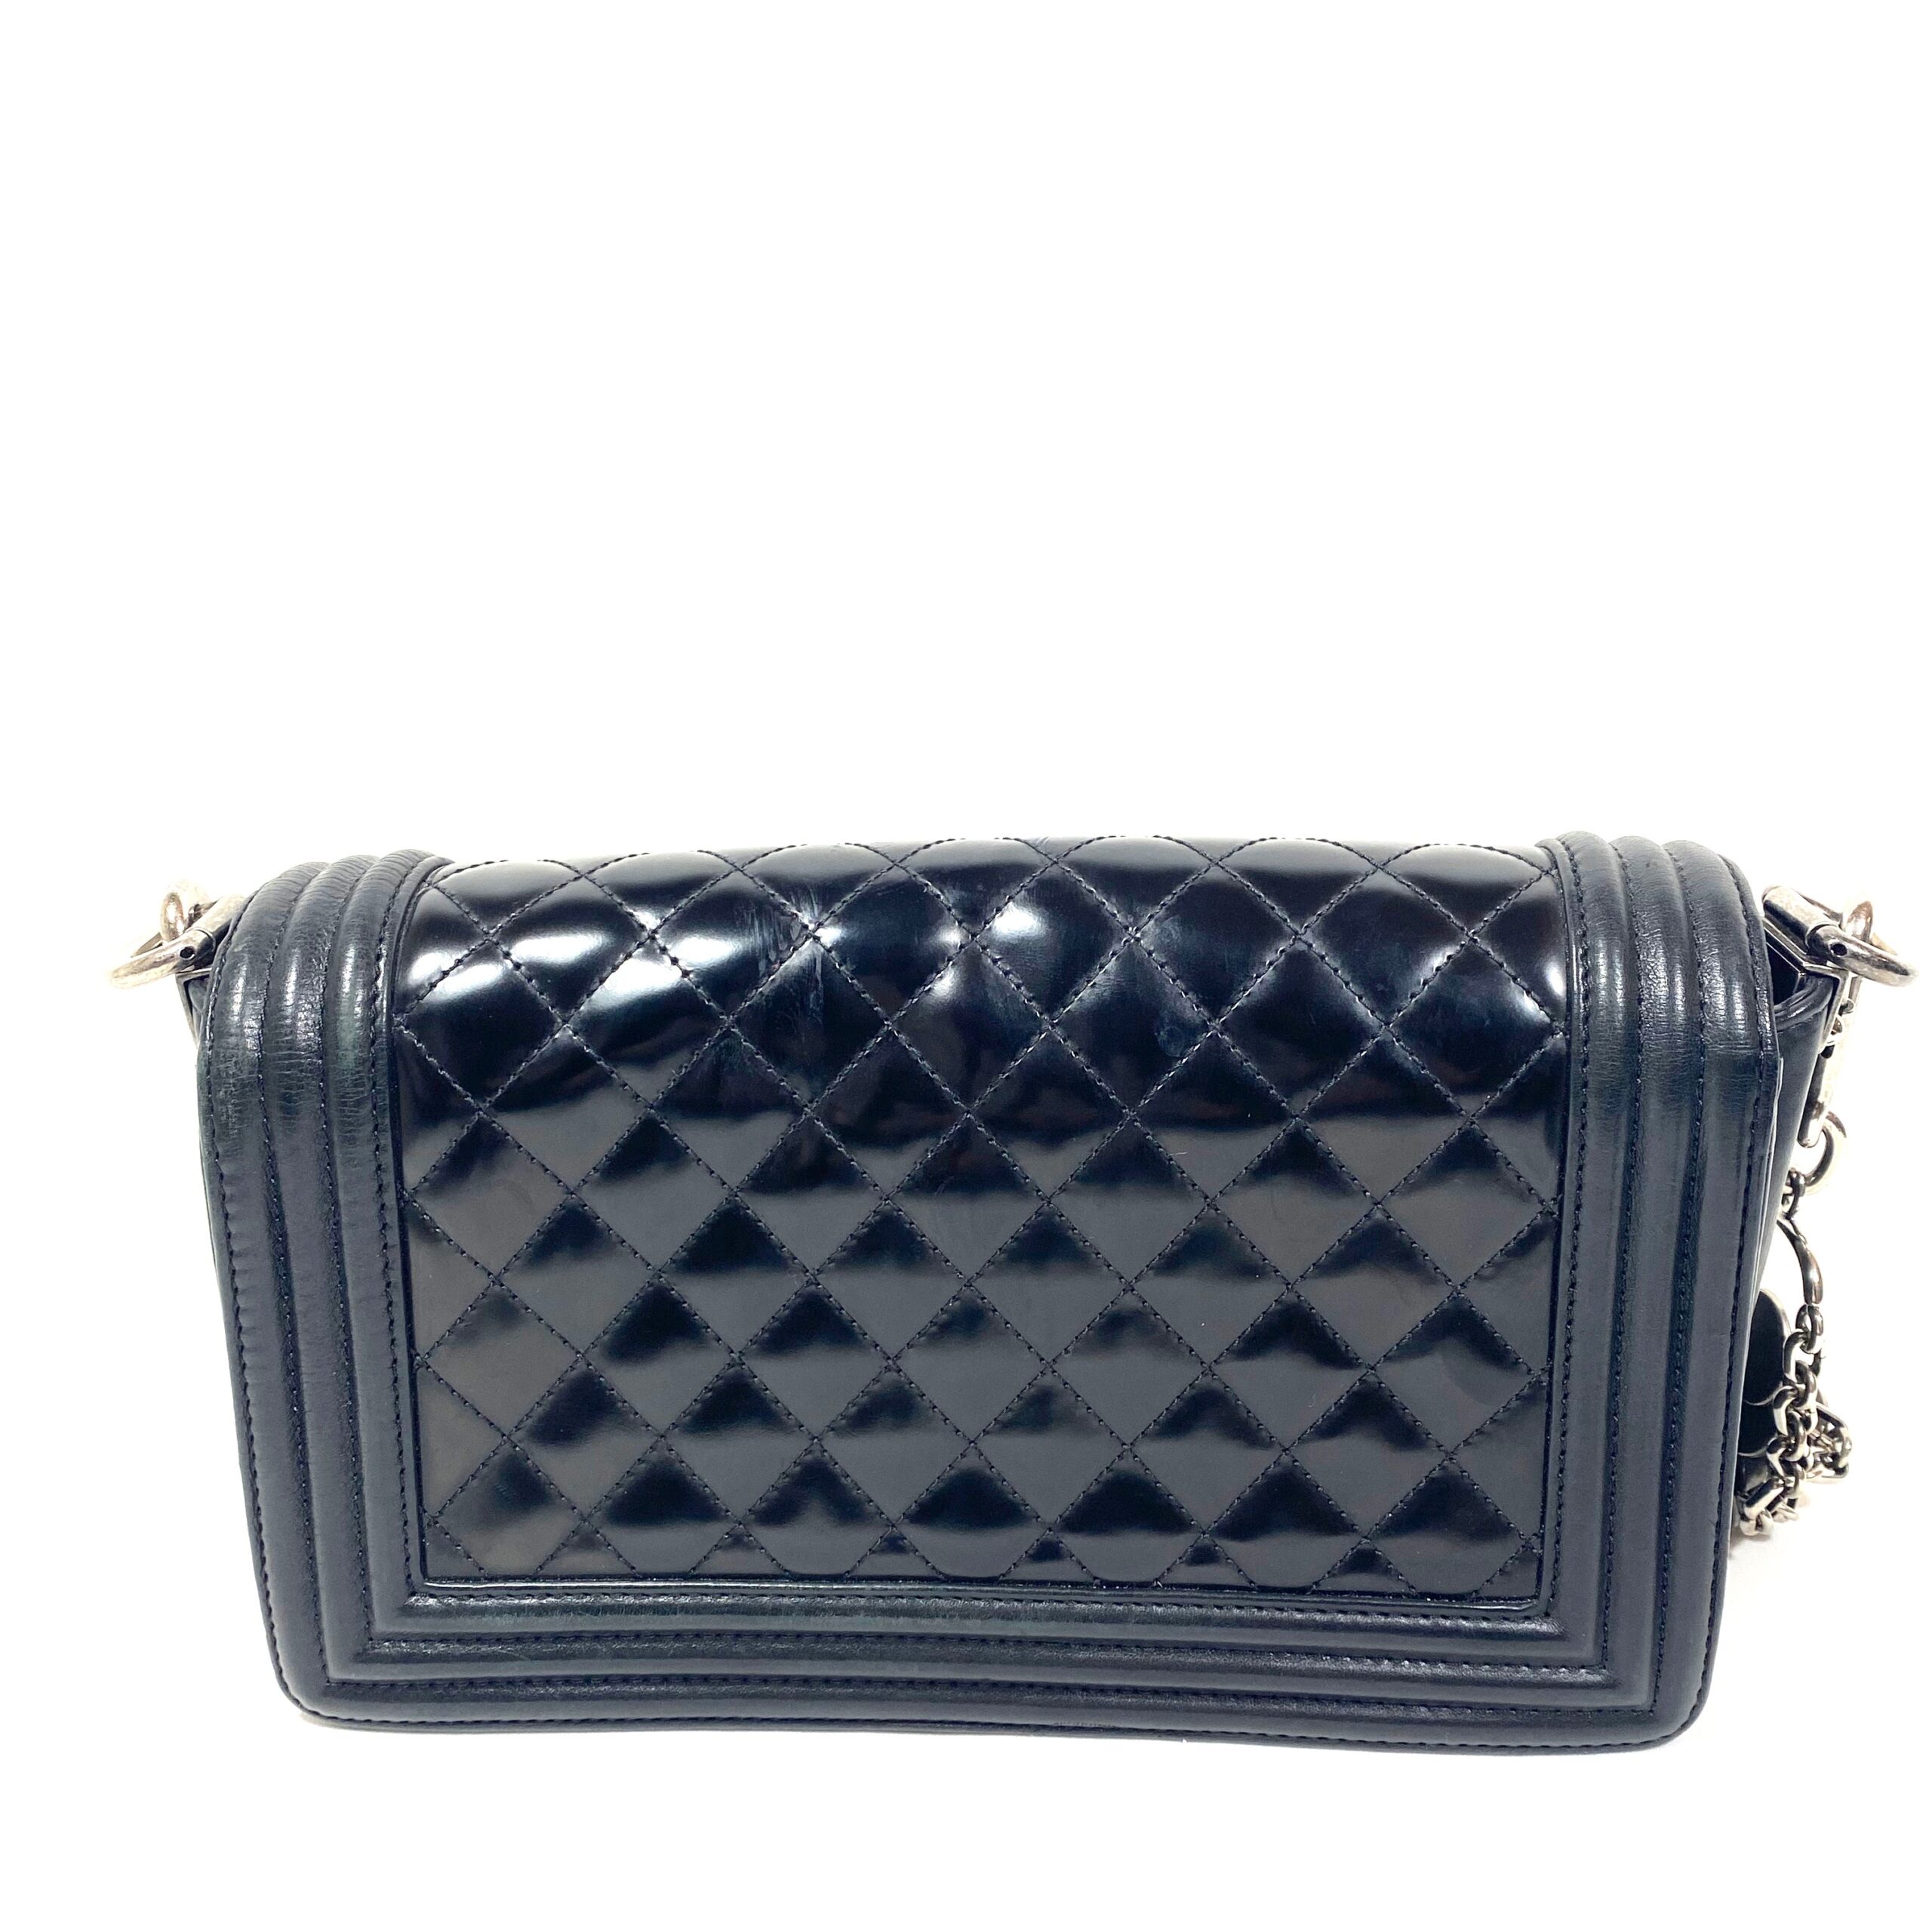 CHANEL Old Medium BOY Caviar Chevron Flap Bag with GHW Excellent Retail  6600  Trường THPT Anhxtanh